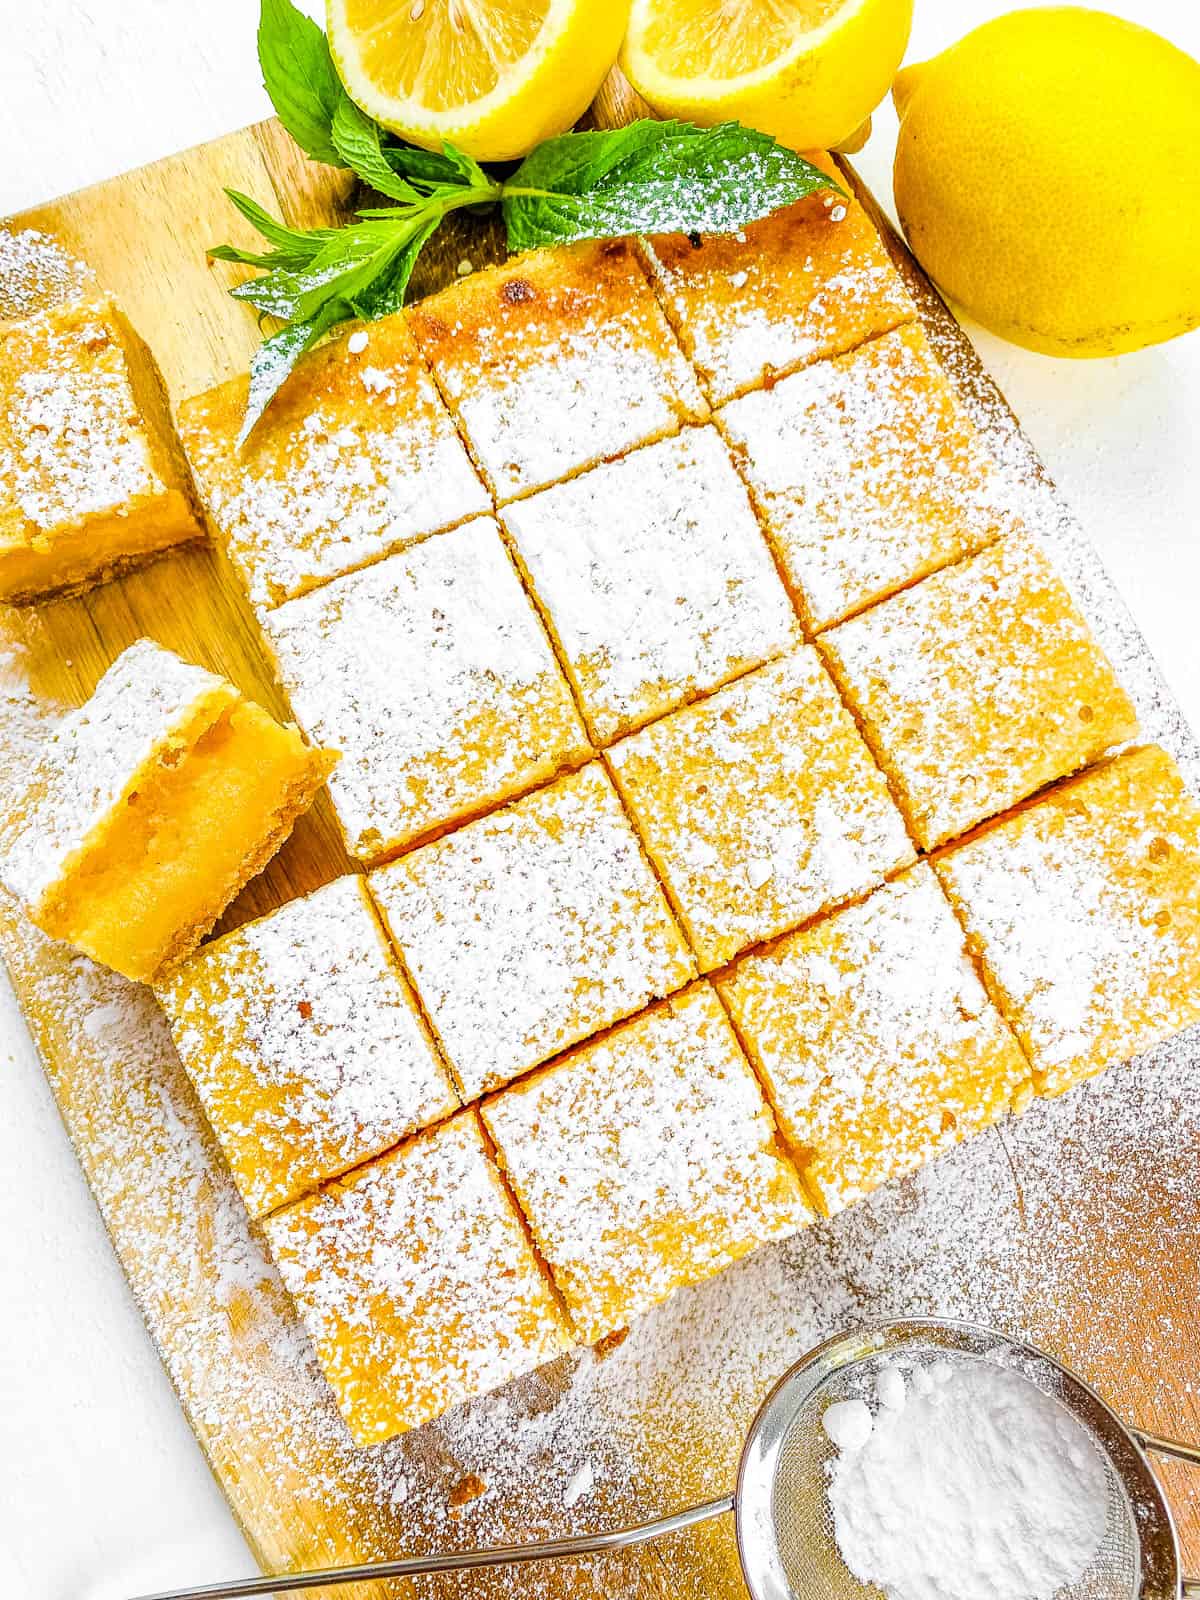 Gluten free lemon bars with graham cracker crust cut into squares on a cutting board.